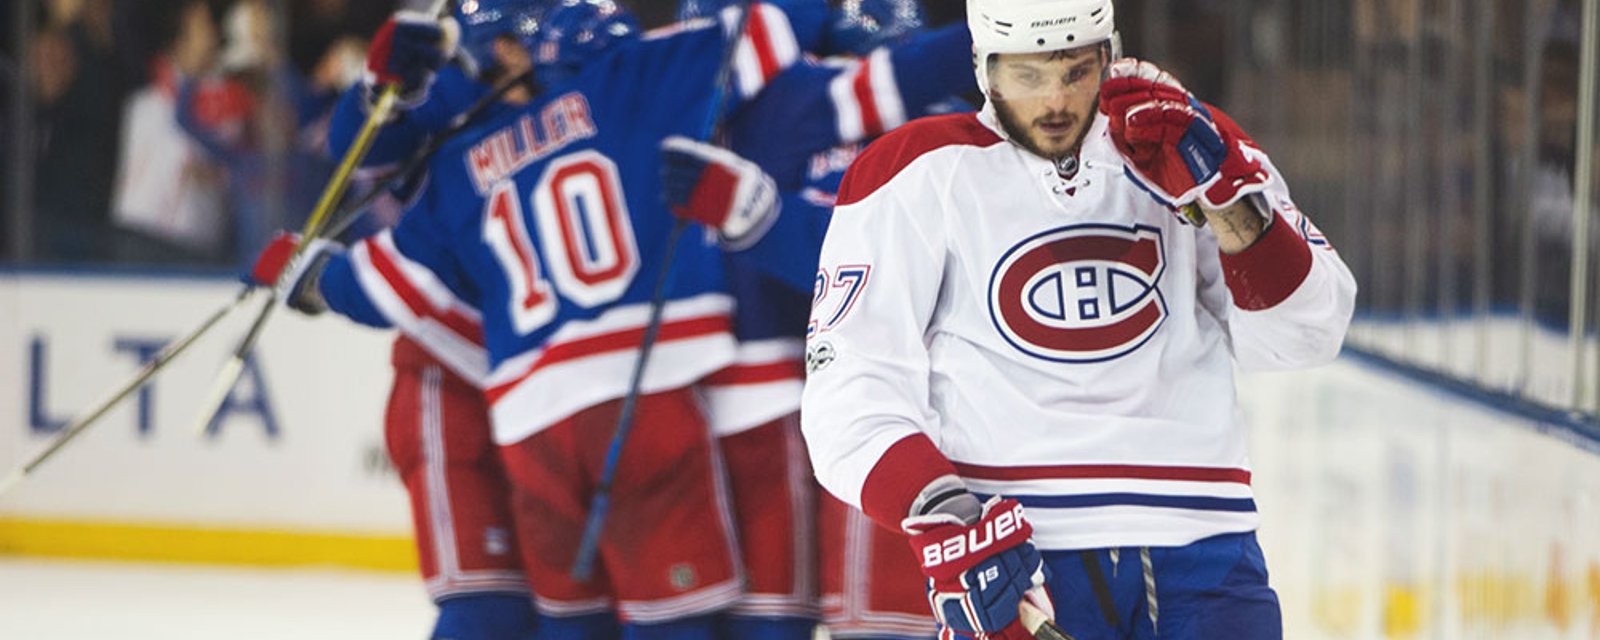 Report: NHL insider links Galchenyuk to Western Conference team